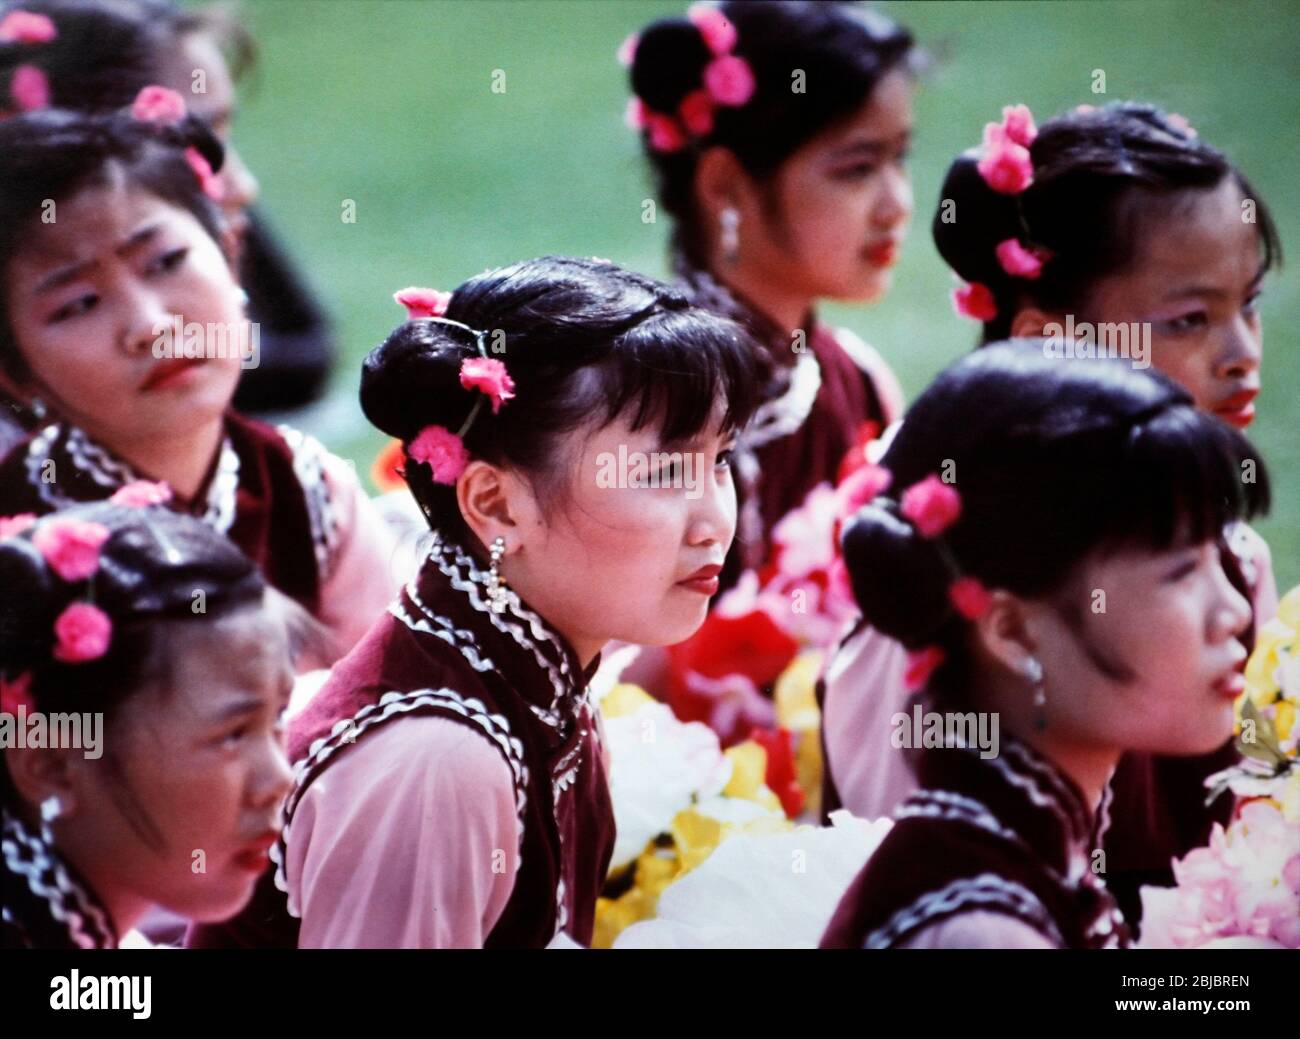 Hong Kong October 1986 Girls in tradition Chinese costume wait patiently to perform for The Queen during he Royal Visit. The picture is is part of a collection of photographs taken in Hong Kong between September and November, 1986. They represent a snapshot of Daily Life in the Crown Colony eleven years before sovereignty was transferred back to mainland China. Photograph by Howard Walker / Alamy. Stock Photo